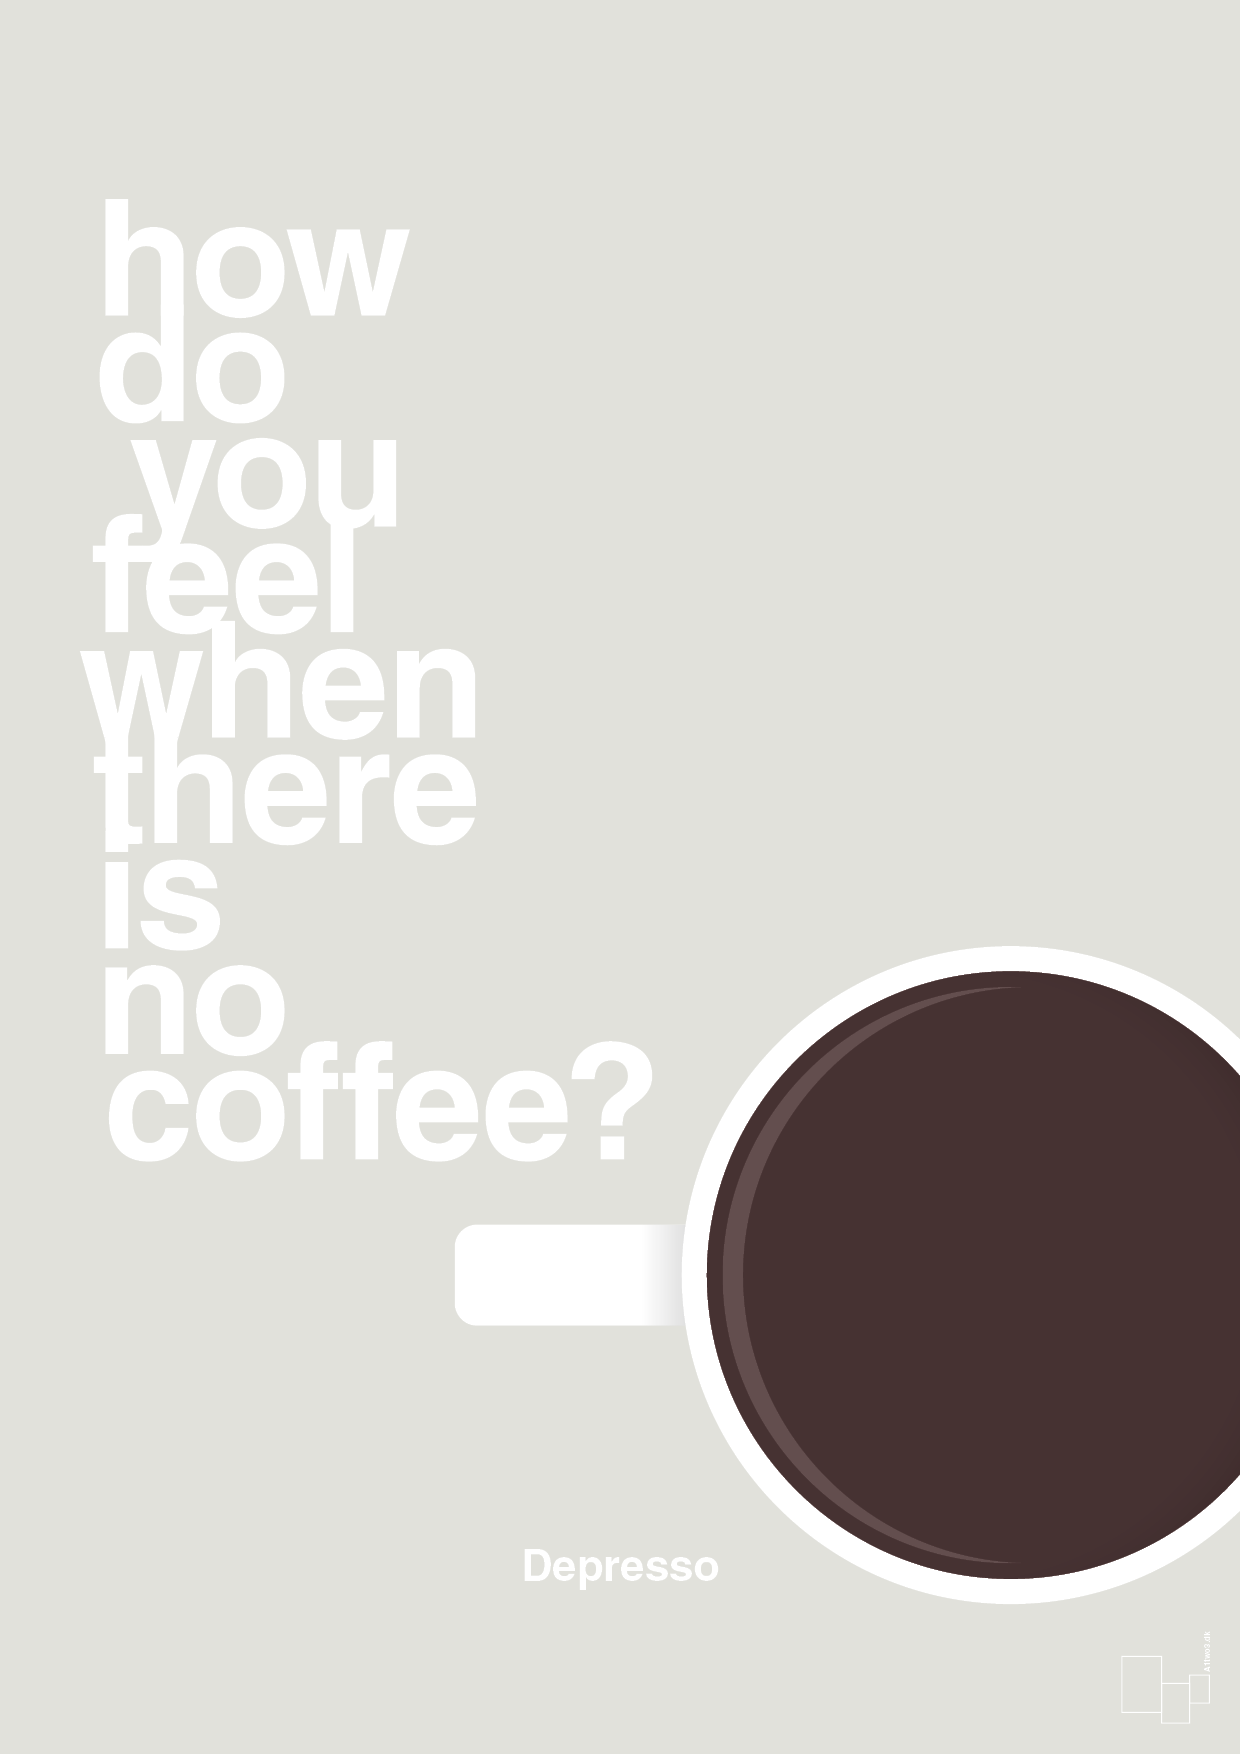 how do you feel when there is no coffee? depresso - Plakat med Mad & Drikke i Painters White